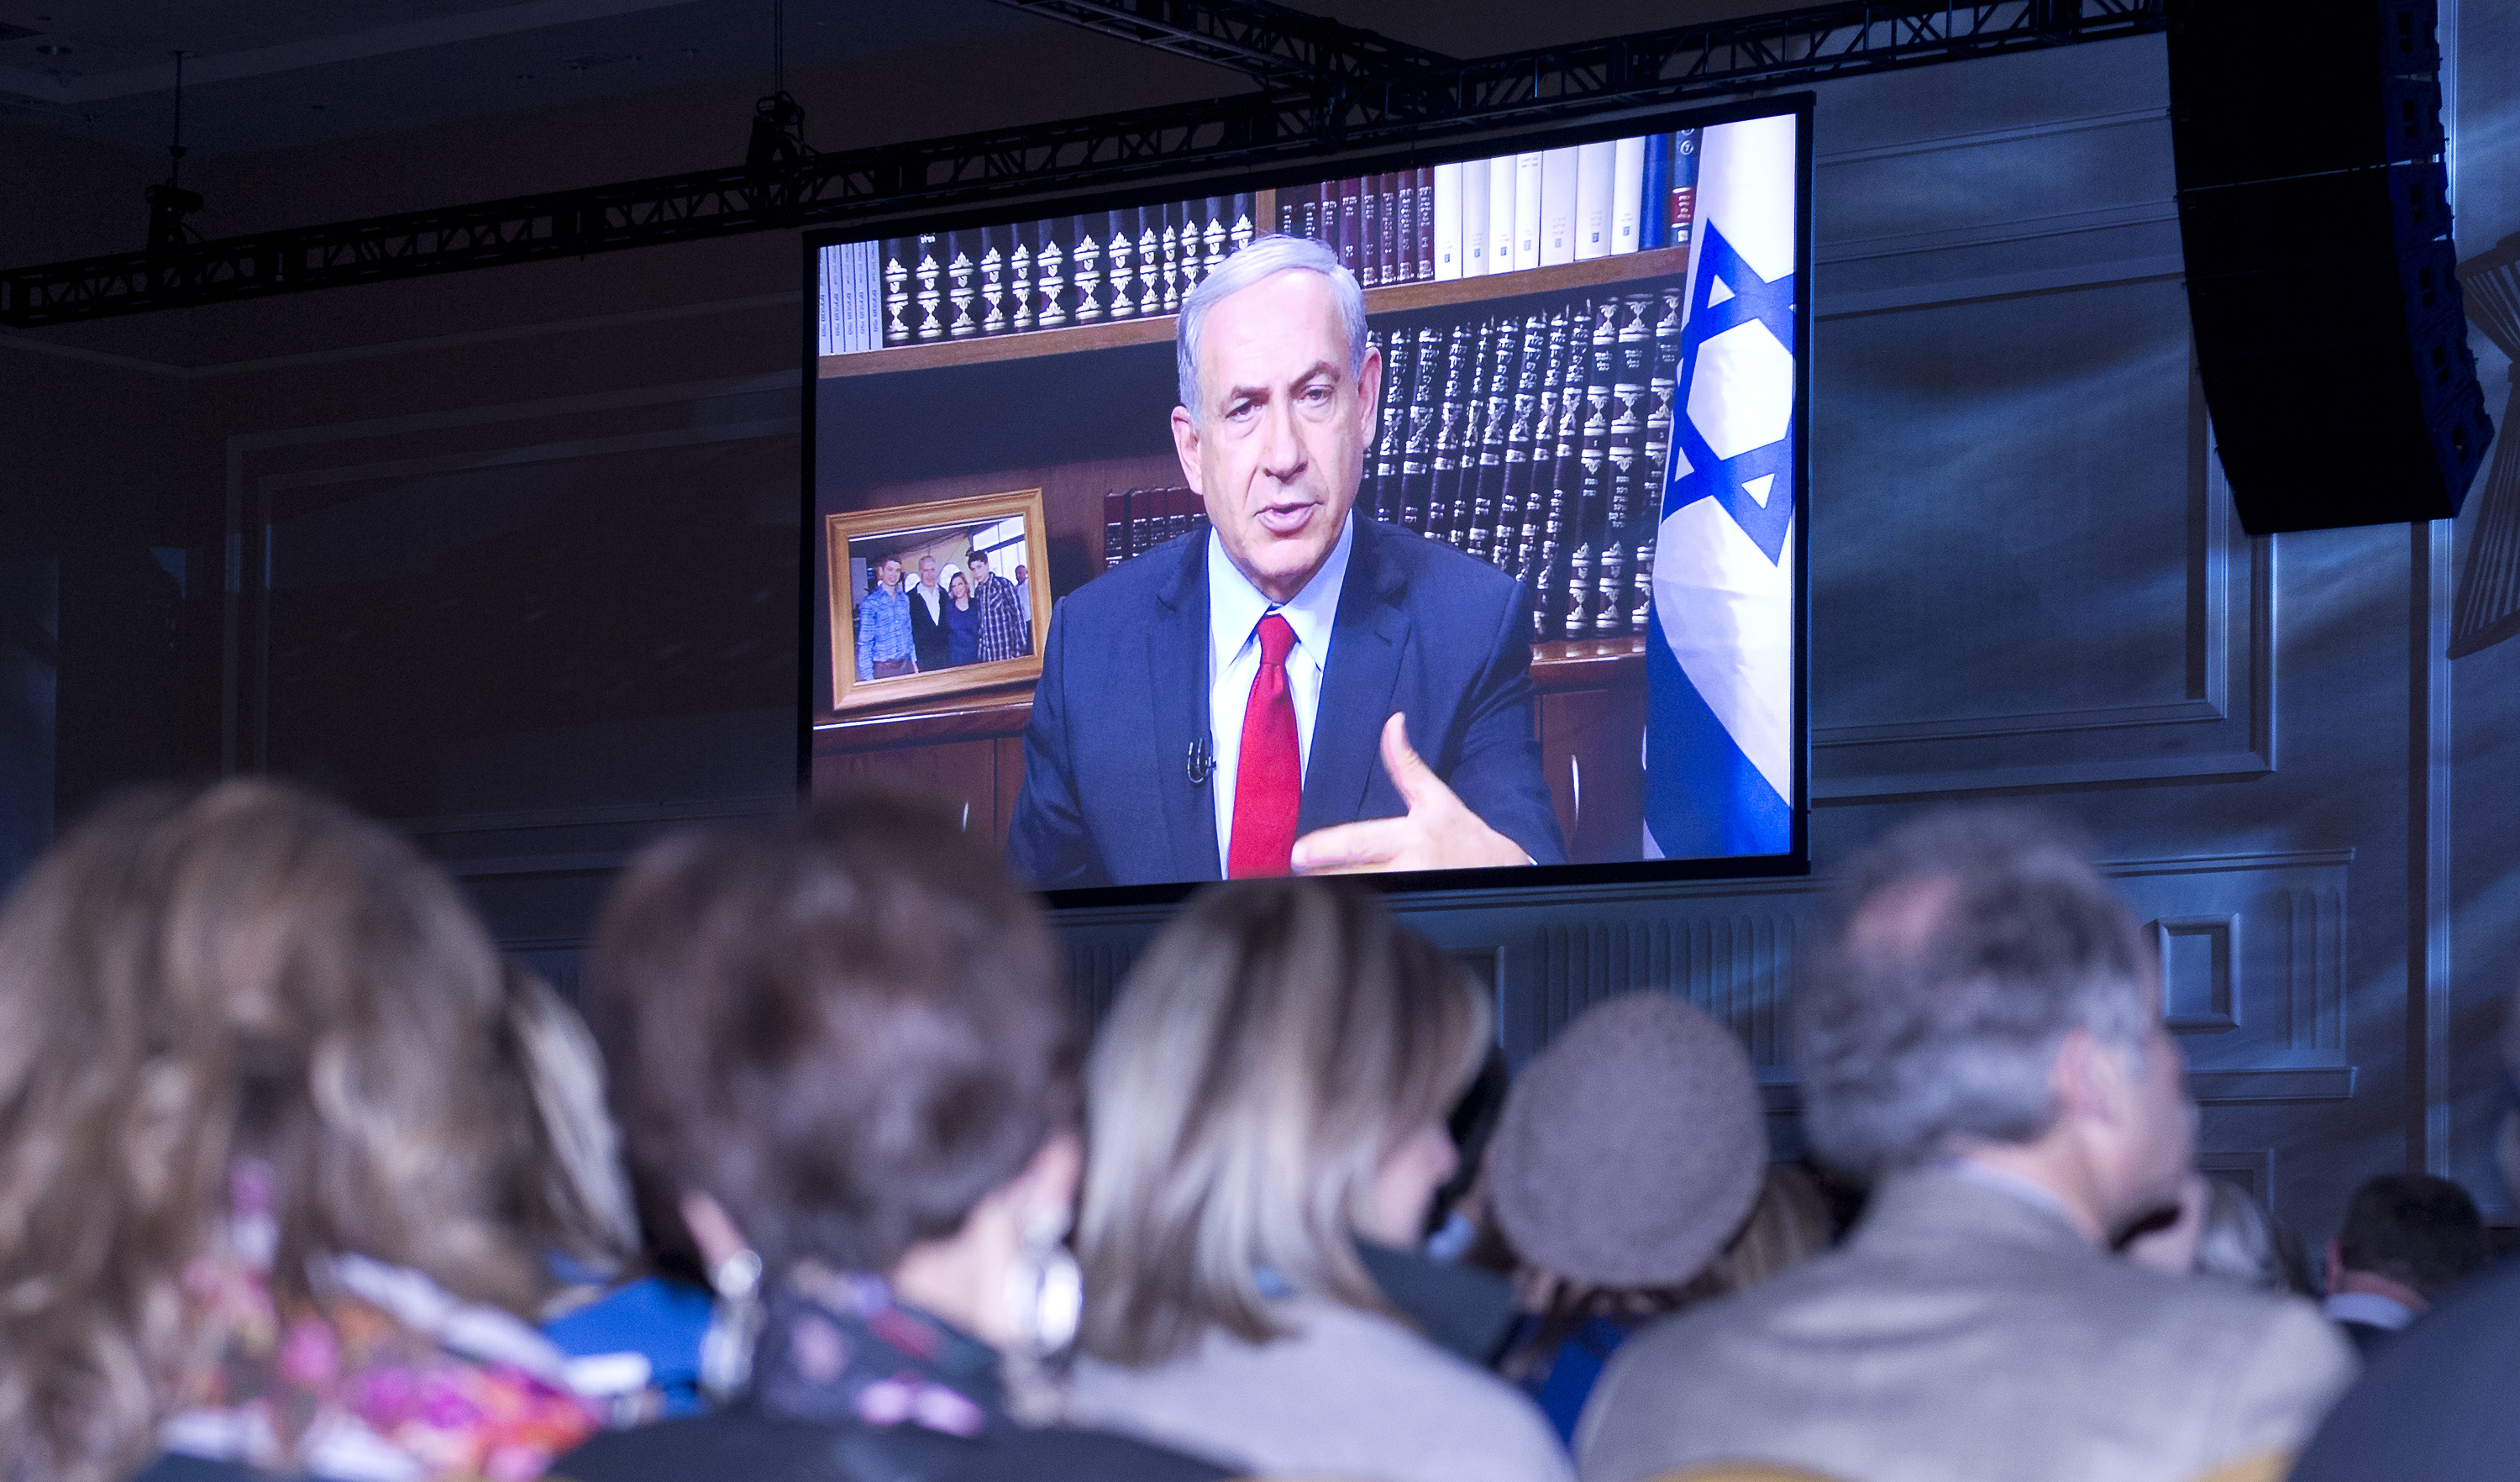 Participants at the 2014 Jewish Federations of North America General Assembly listen as Prime Minister Benjamin Netanyahu addresses the gathering via satellite at National Harbor, Maryland on Monday, November 10, 2014.  Netanyahu discussed the dangers of a nuclear Iran and the importance of working side by side with the United States in the fight against extremism.
Credit: Ron Sachs